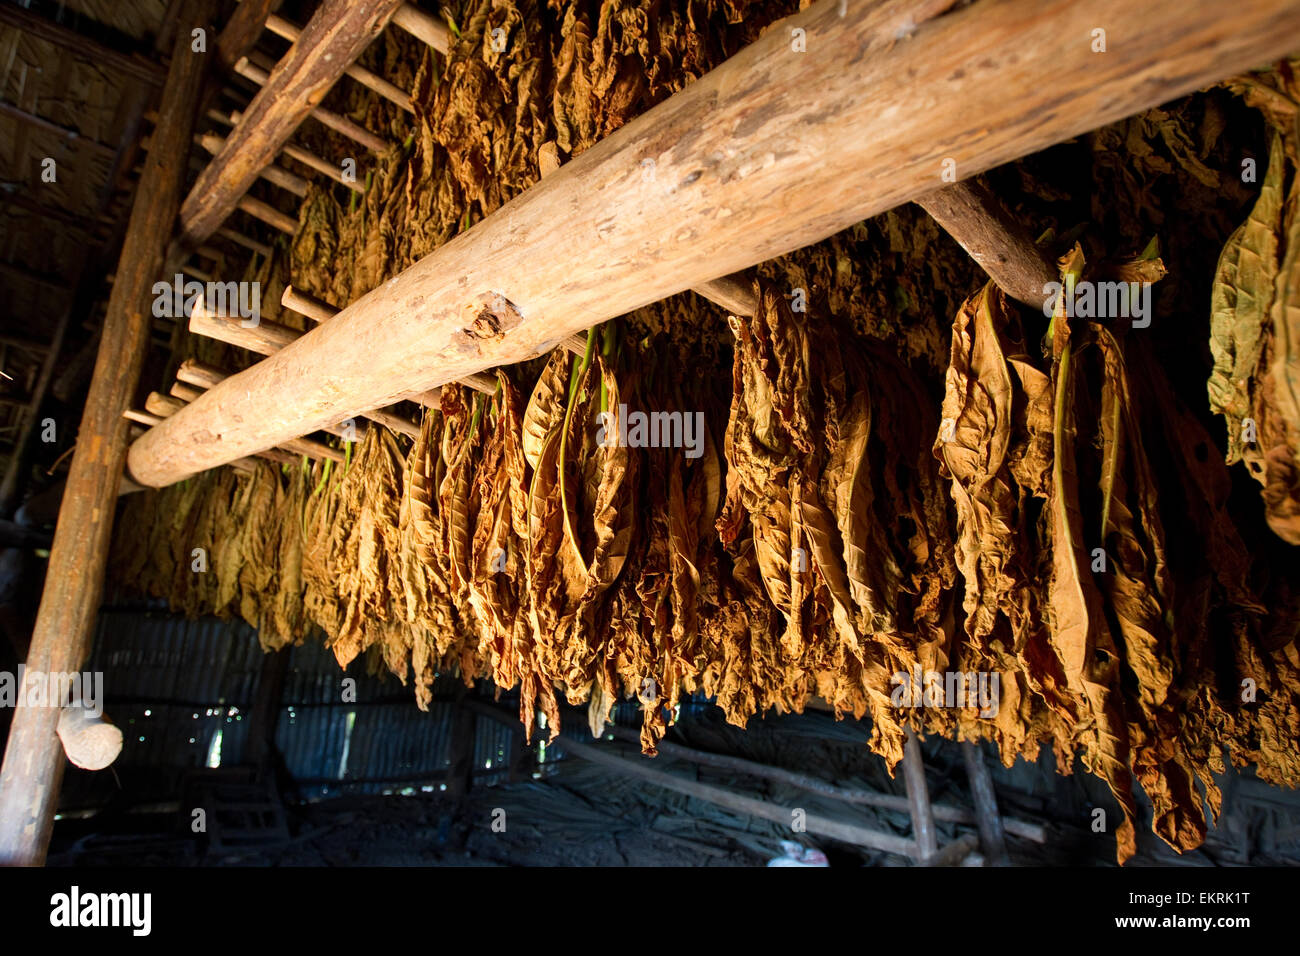 Tobacco plants drying in a barn in Vinales,Cuba Stock Photo